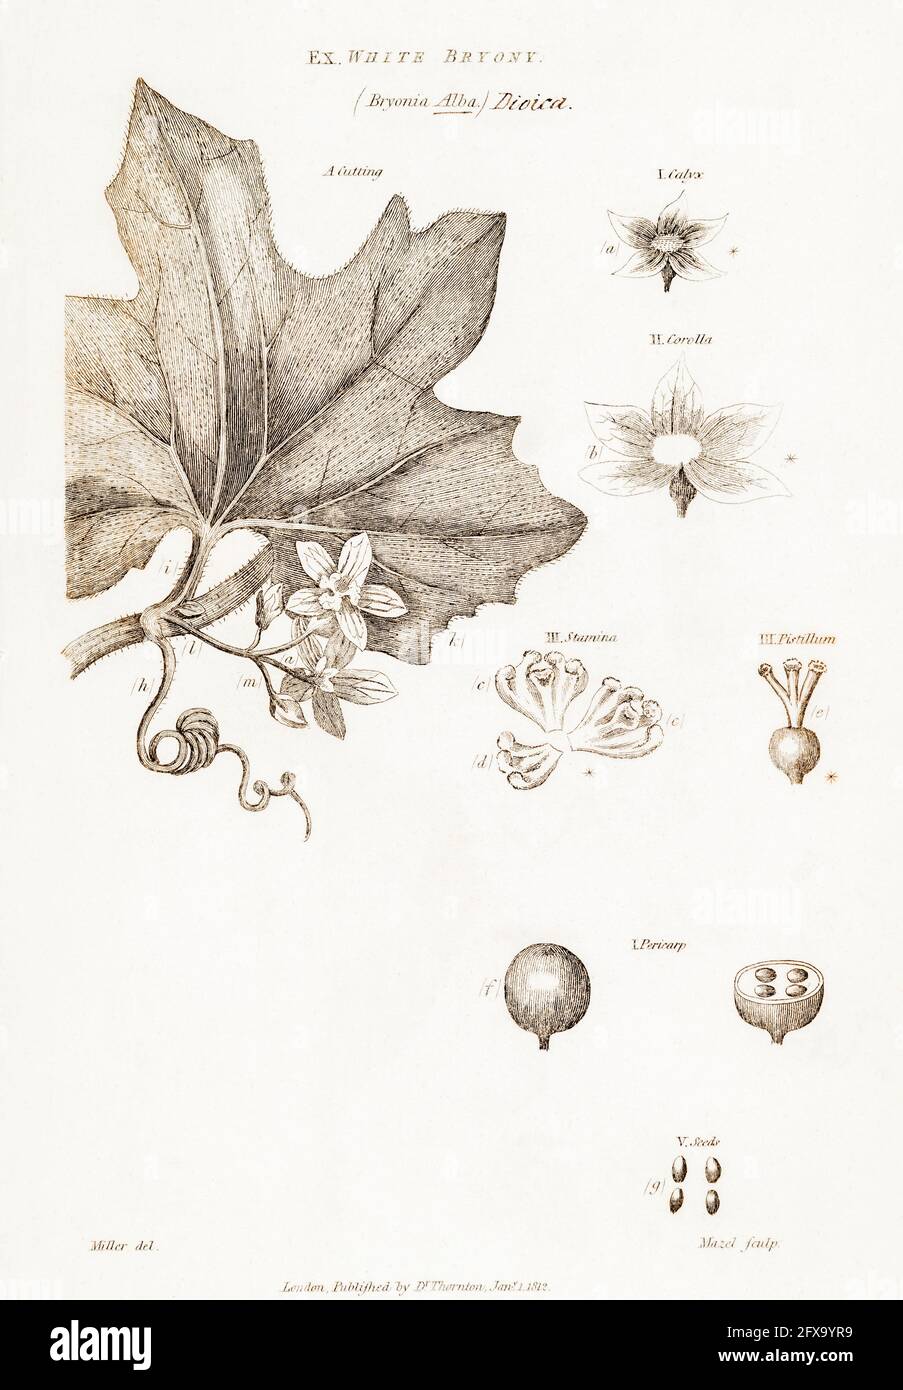 Copperplate botanical illustration of White Bryony / Bryonia alba from Robert Thornton's British Flora, 1812. Poisonous plant once used in medicine. Stock Photo